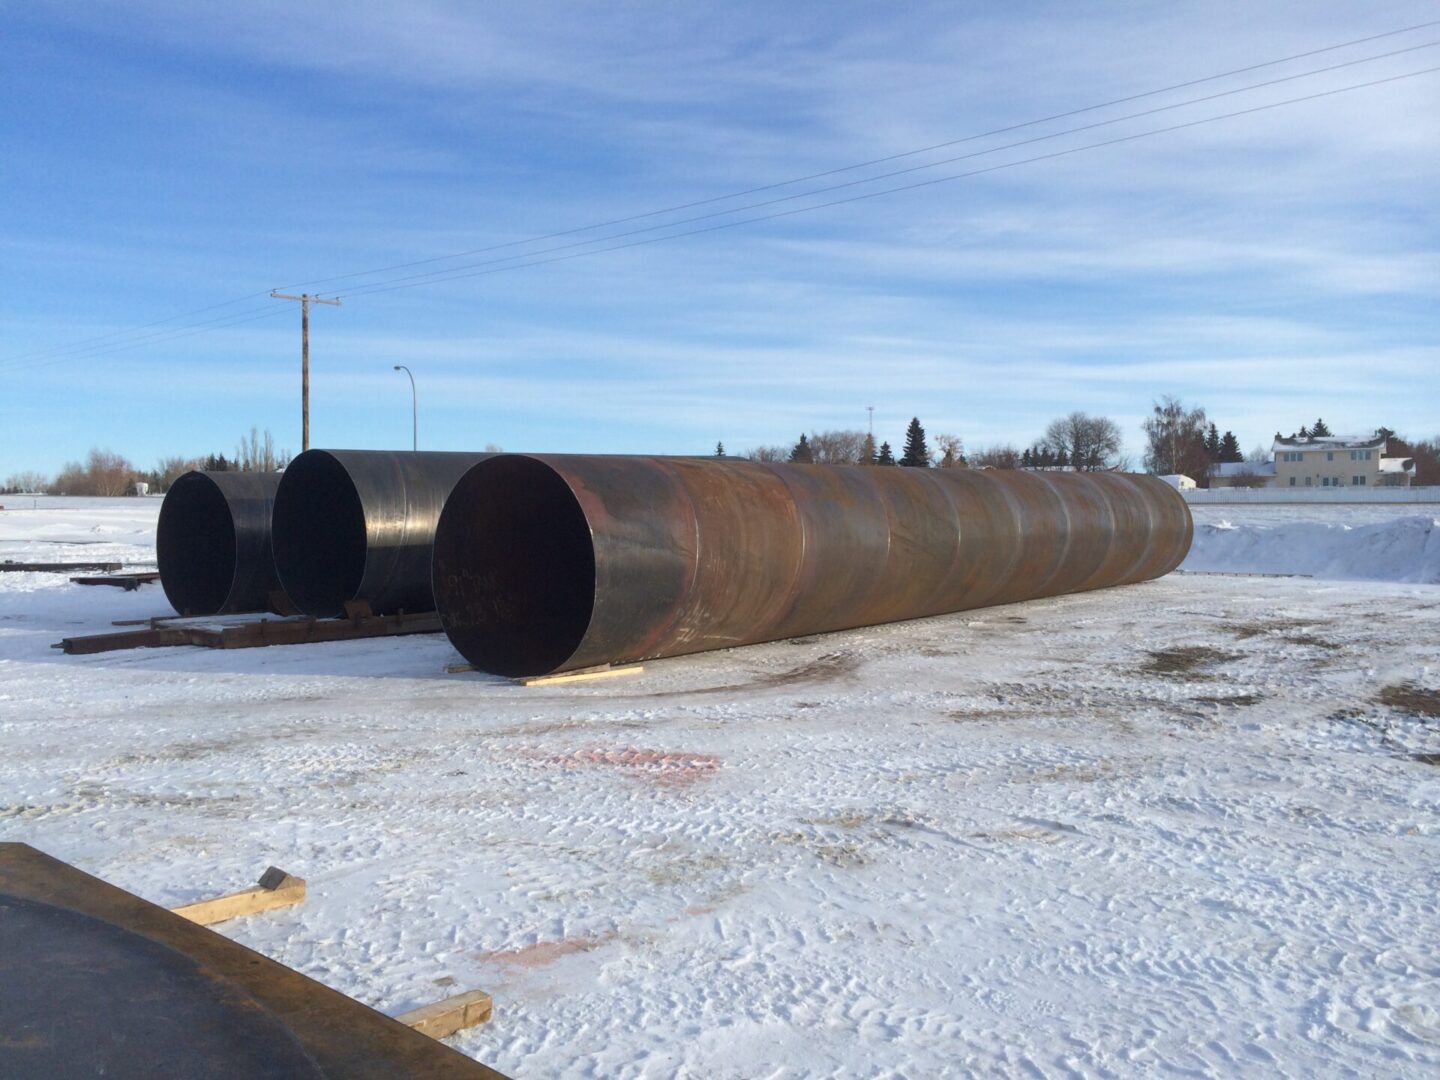 Three large pipes placed together